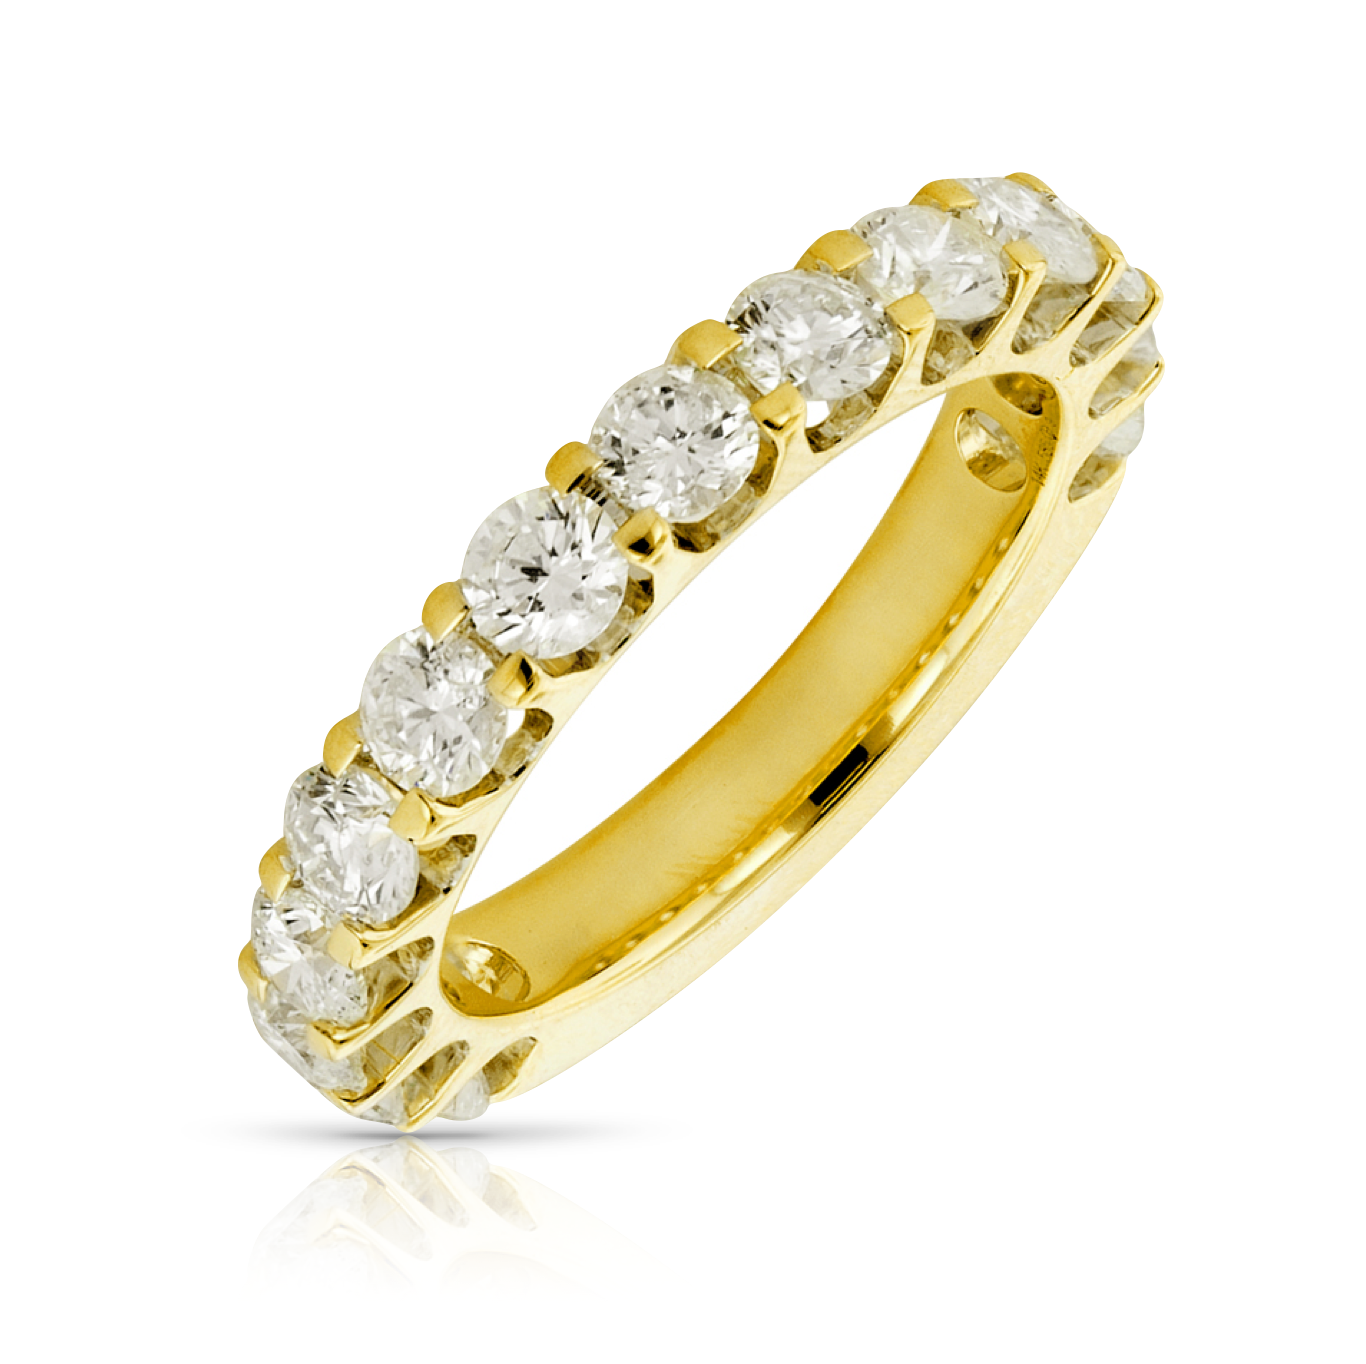 Imperial Diamond Statement Eternity Band